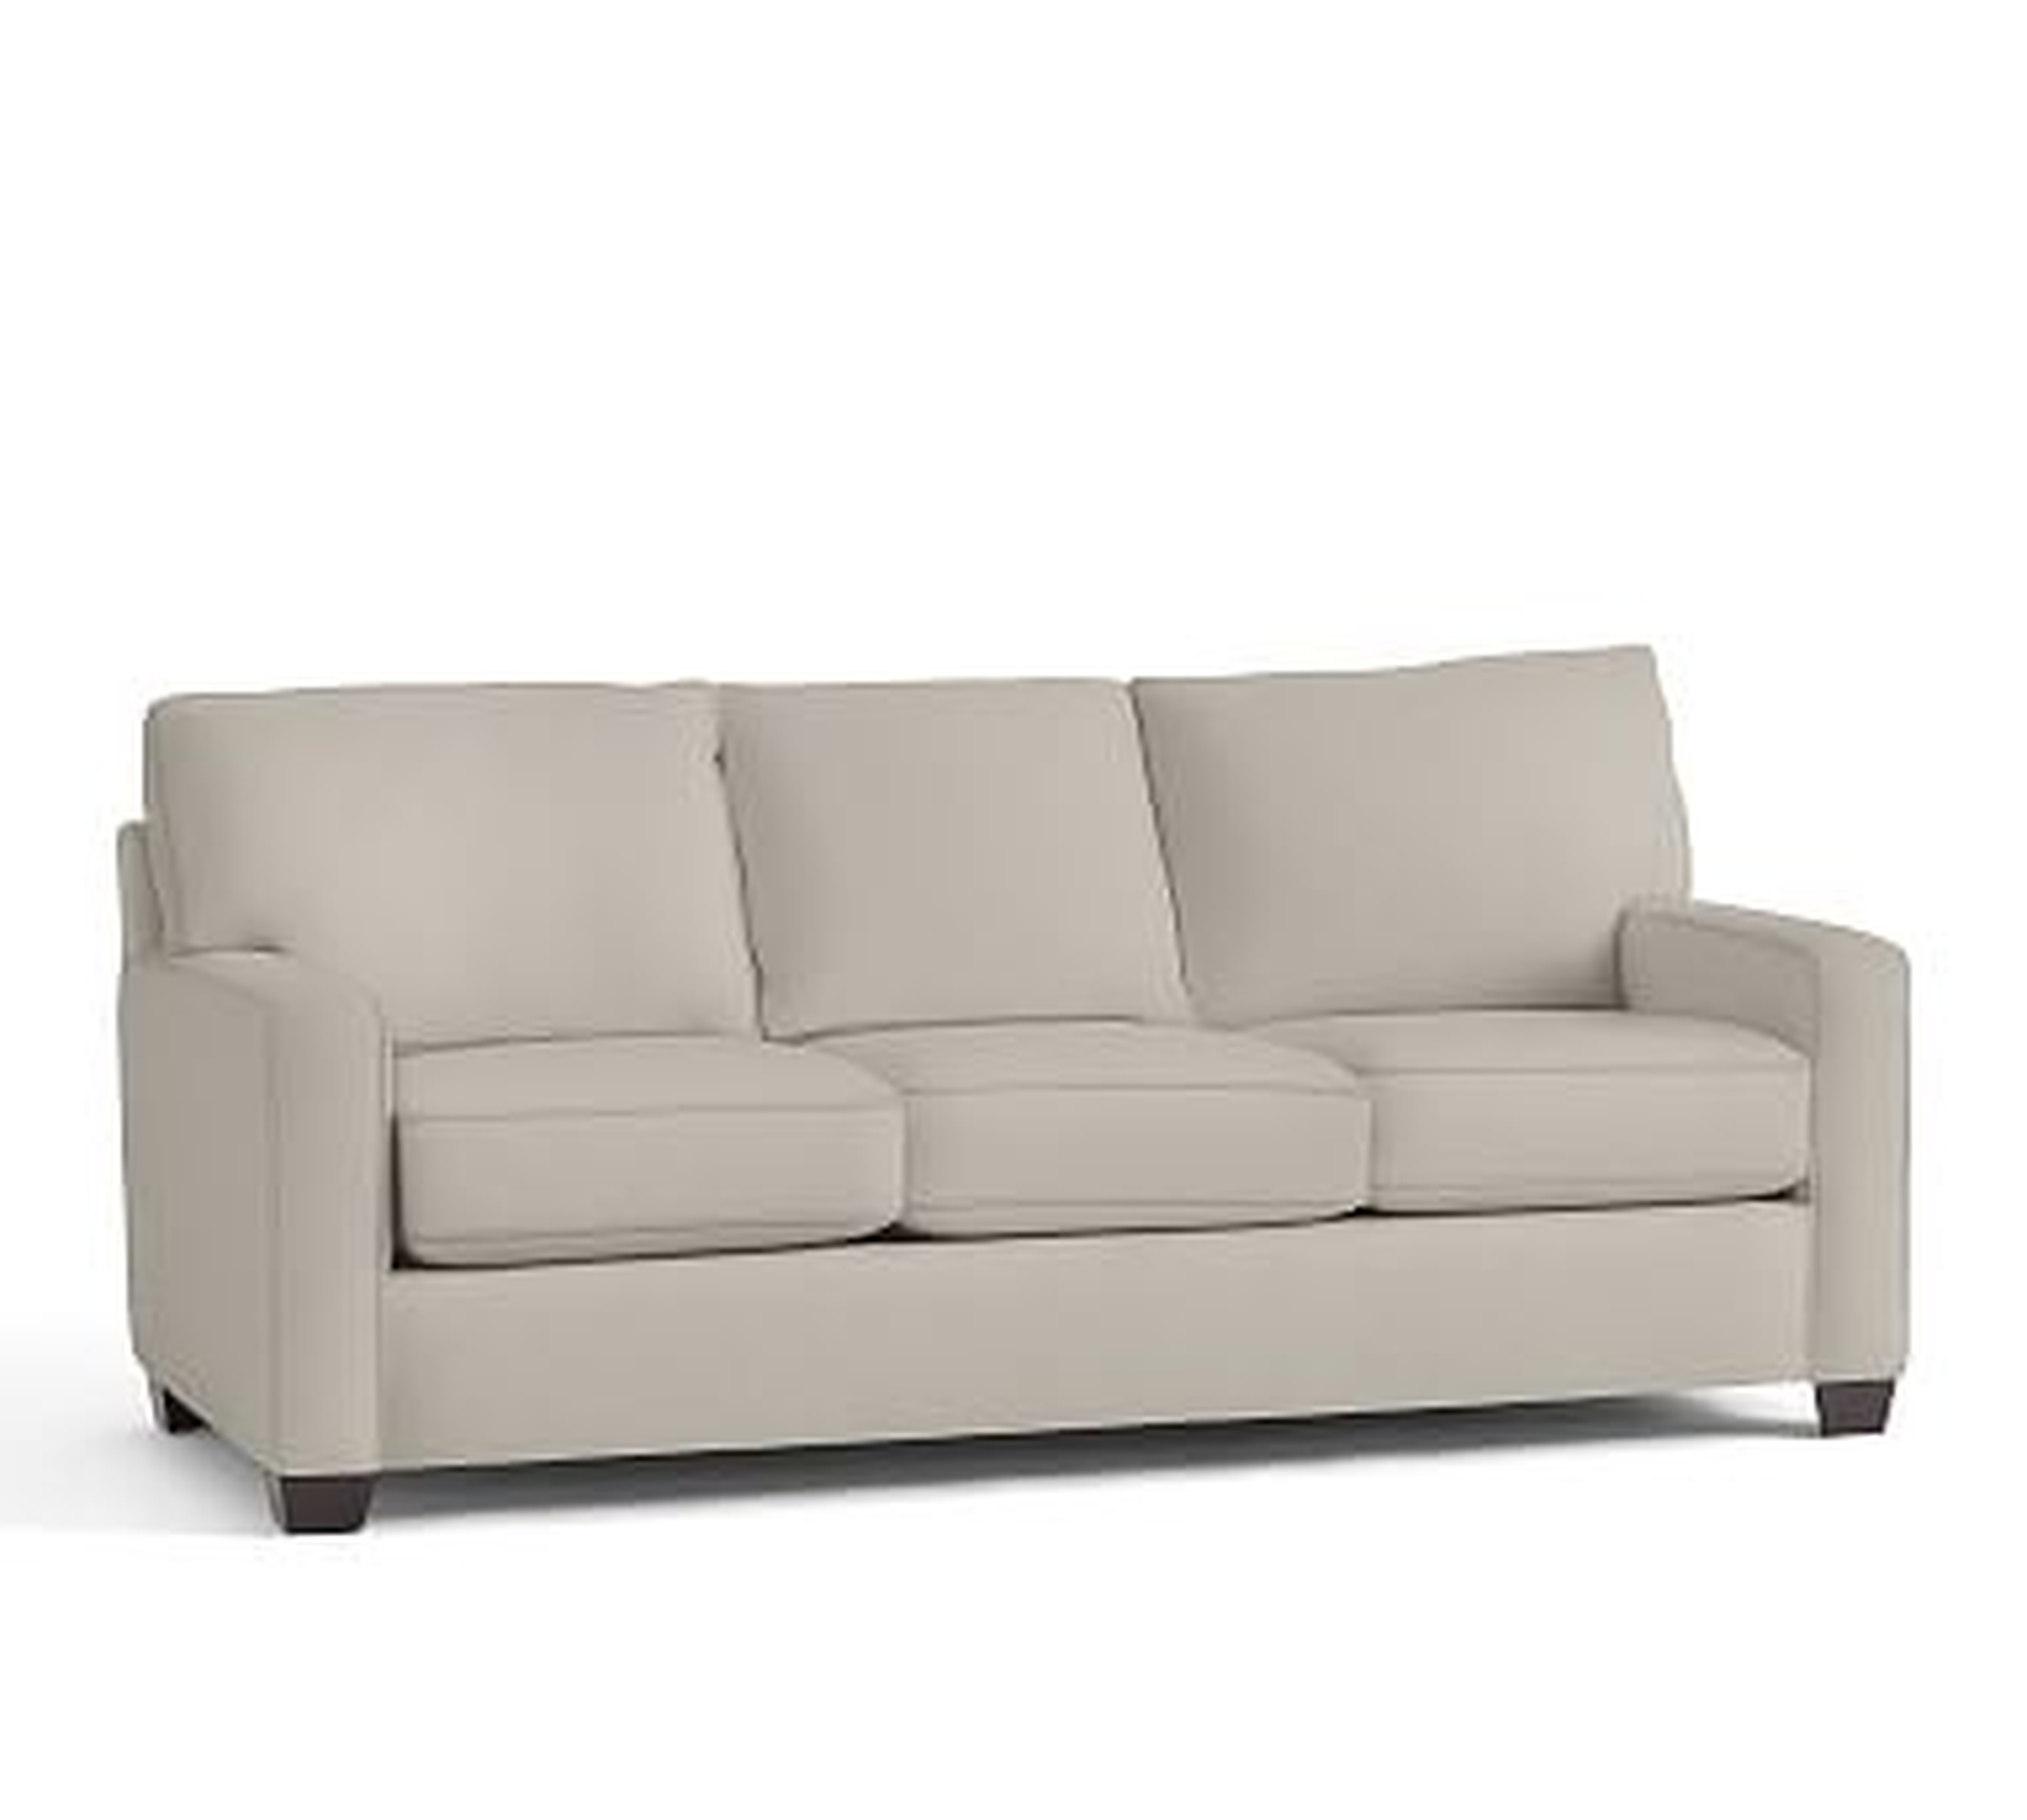 Buchanan Square Arm Upholstered Sleeper Sofa, Polyester Wrapped Cushions, Washed Linen/Cotton Silver Taupe - Pottery Barn